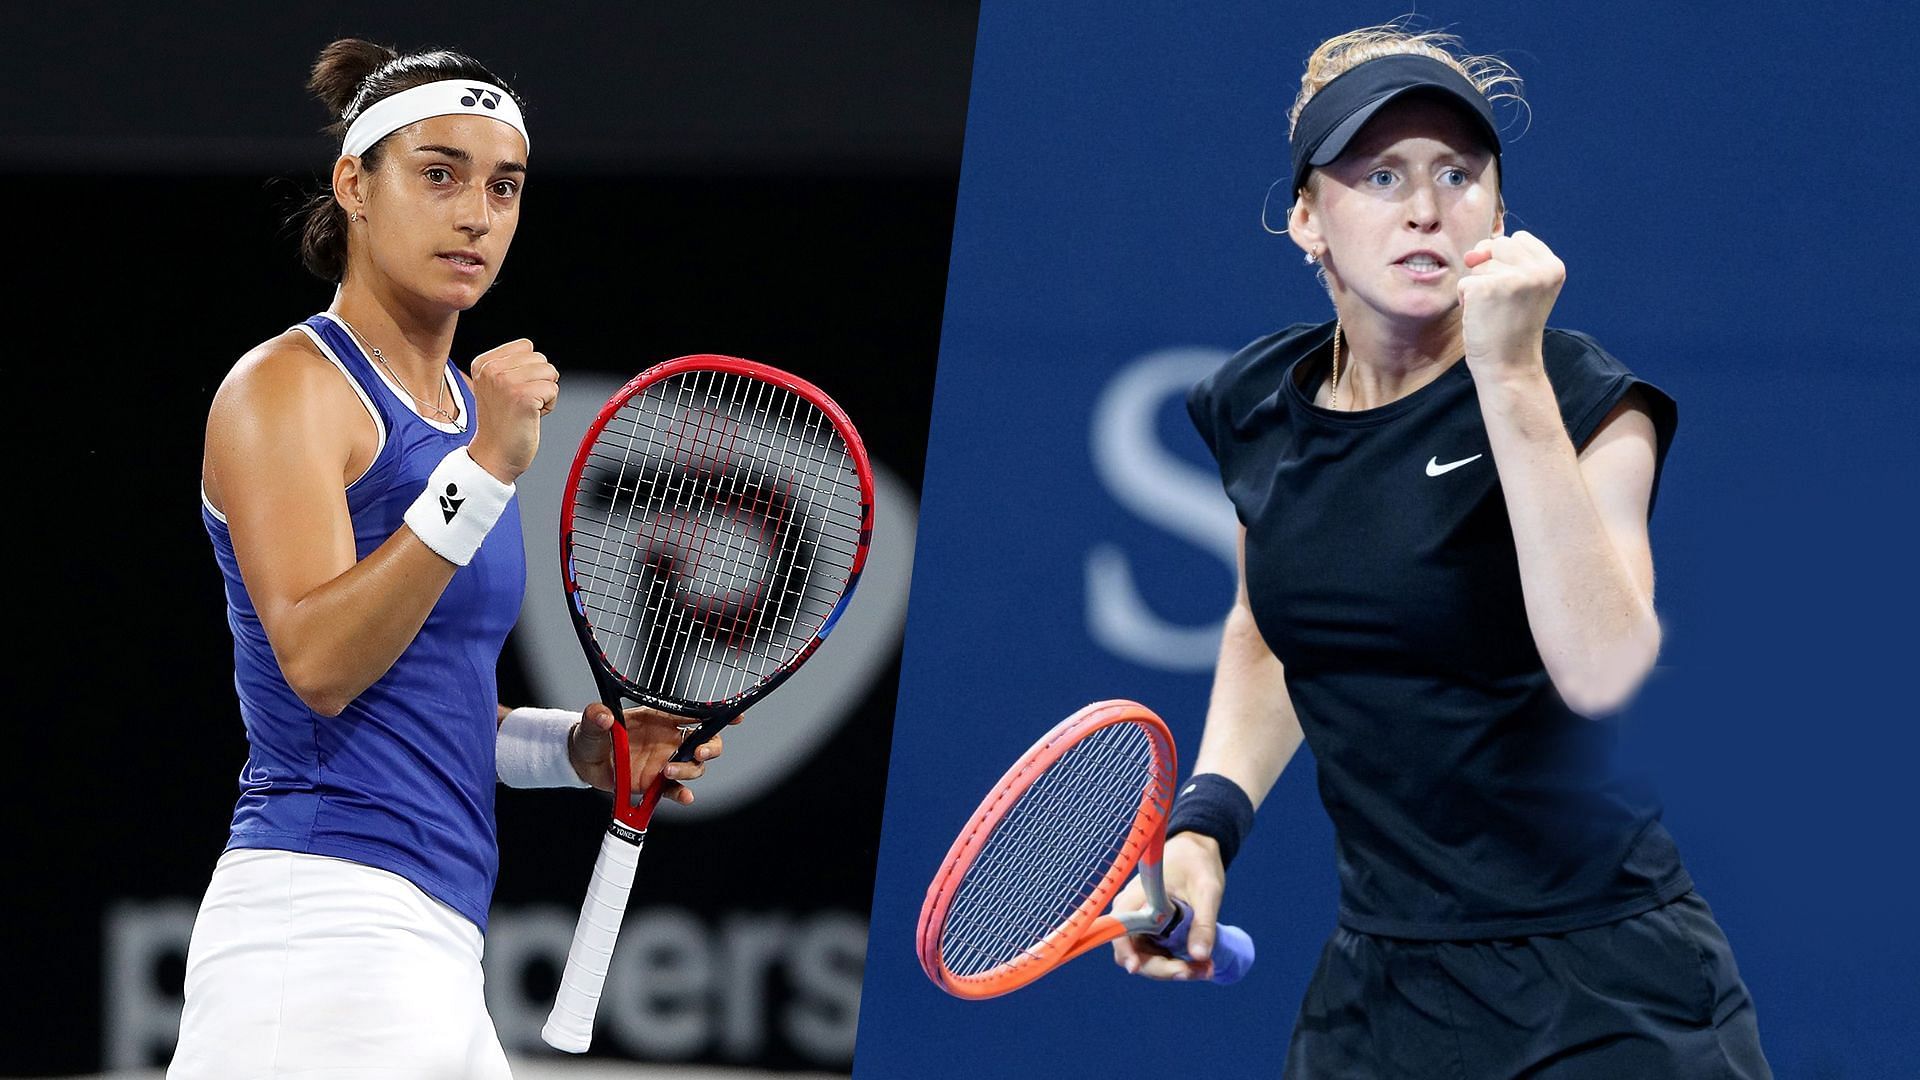 Caroline Garcia will face Katherine Sebov in the first round of the Australian Open